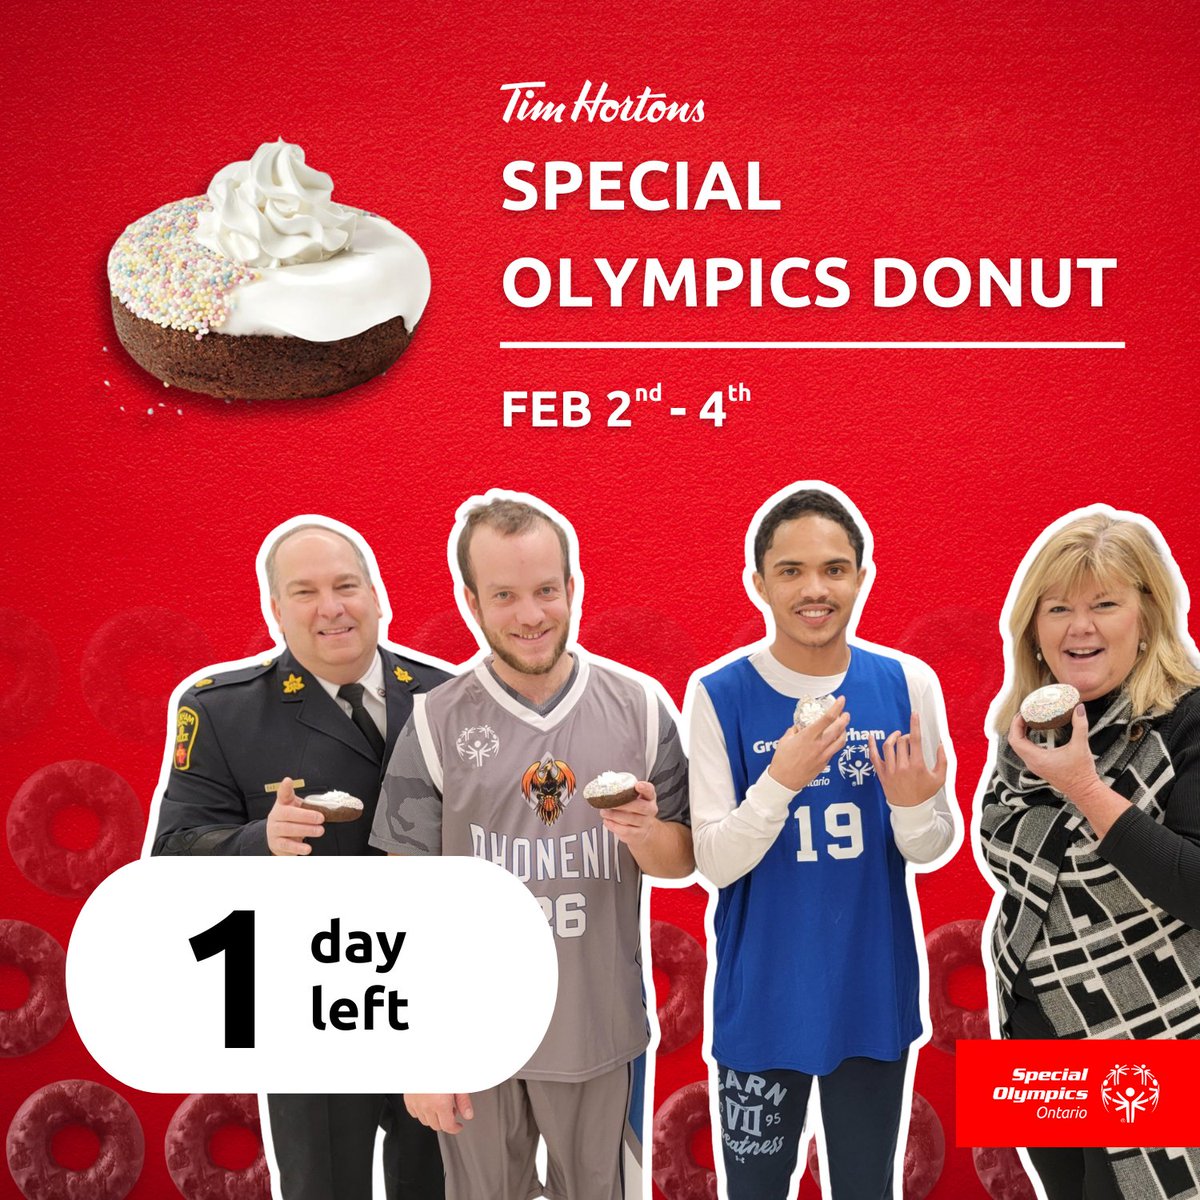 Only 1 day left before you can enjoy a Special Olympics Donut! Capture photos of your donut purchase for a chance to win one of five $20 Tim Hortons Gift Cards! For contest details and more info please visit soontar.io/2024-Tims.